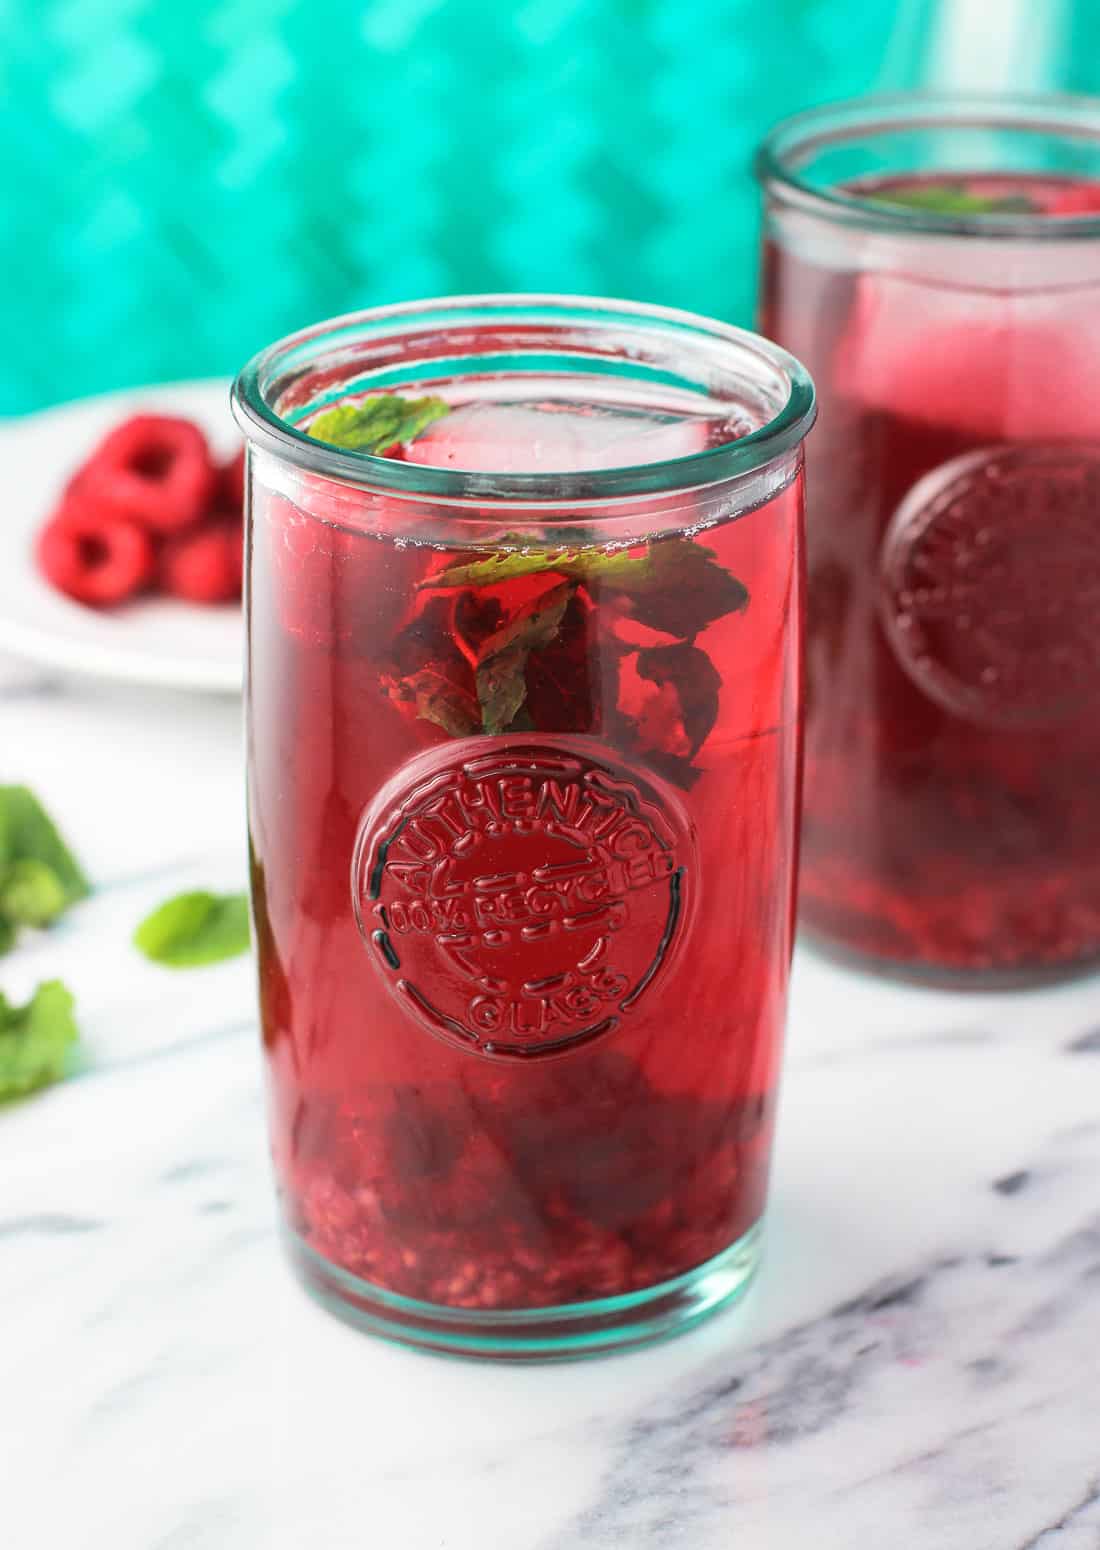 A large glass filled with iced tea garnished with raspberries and fresh mint leaves